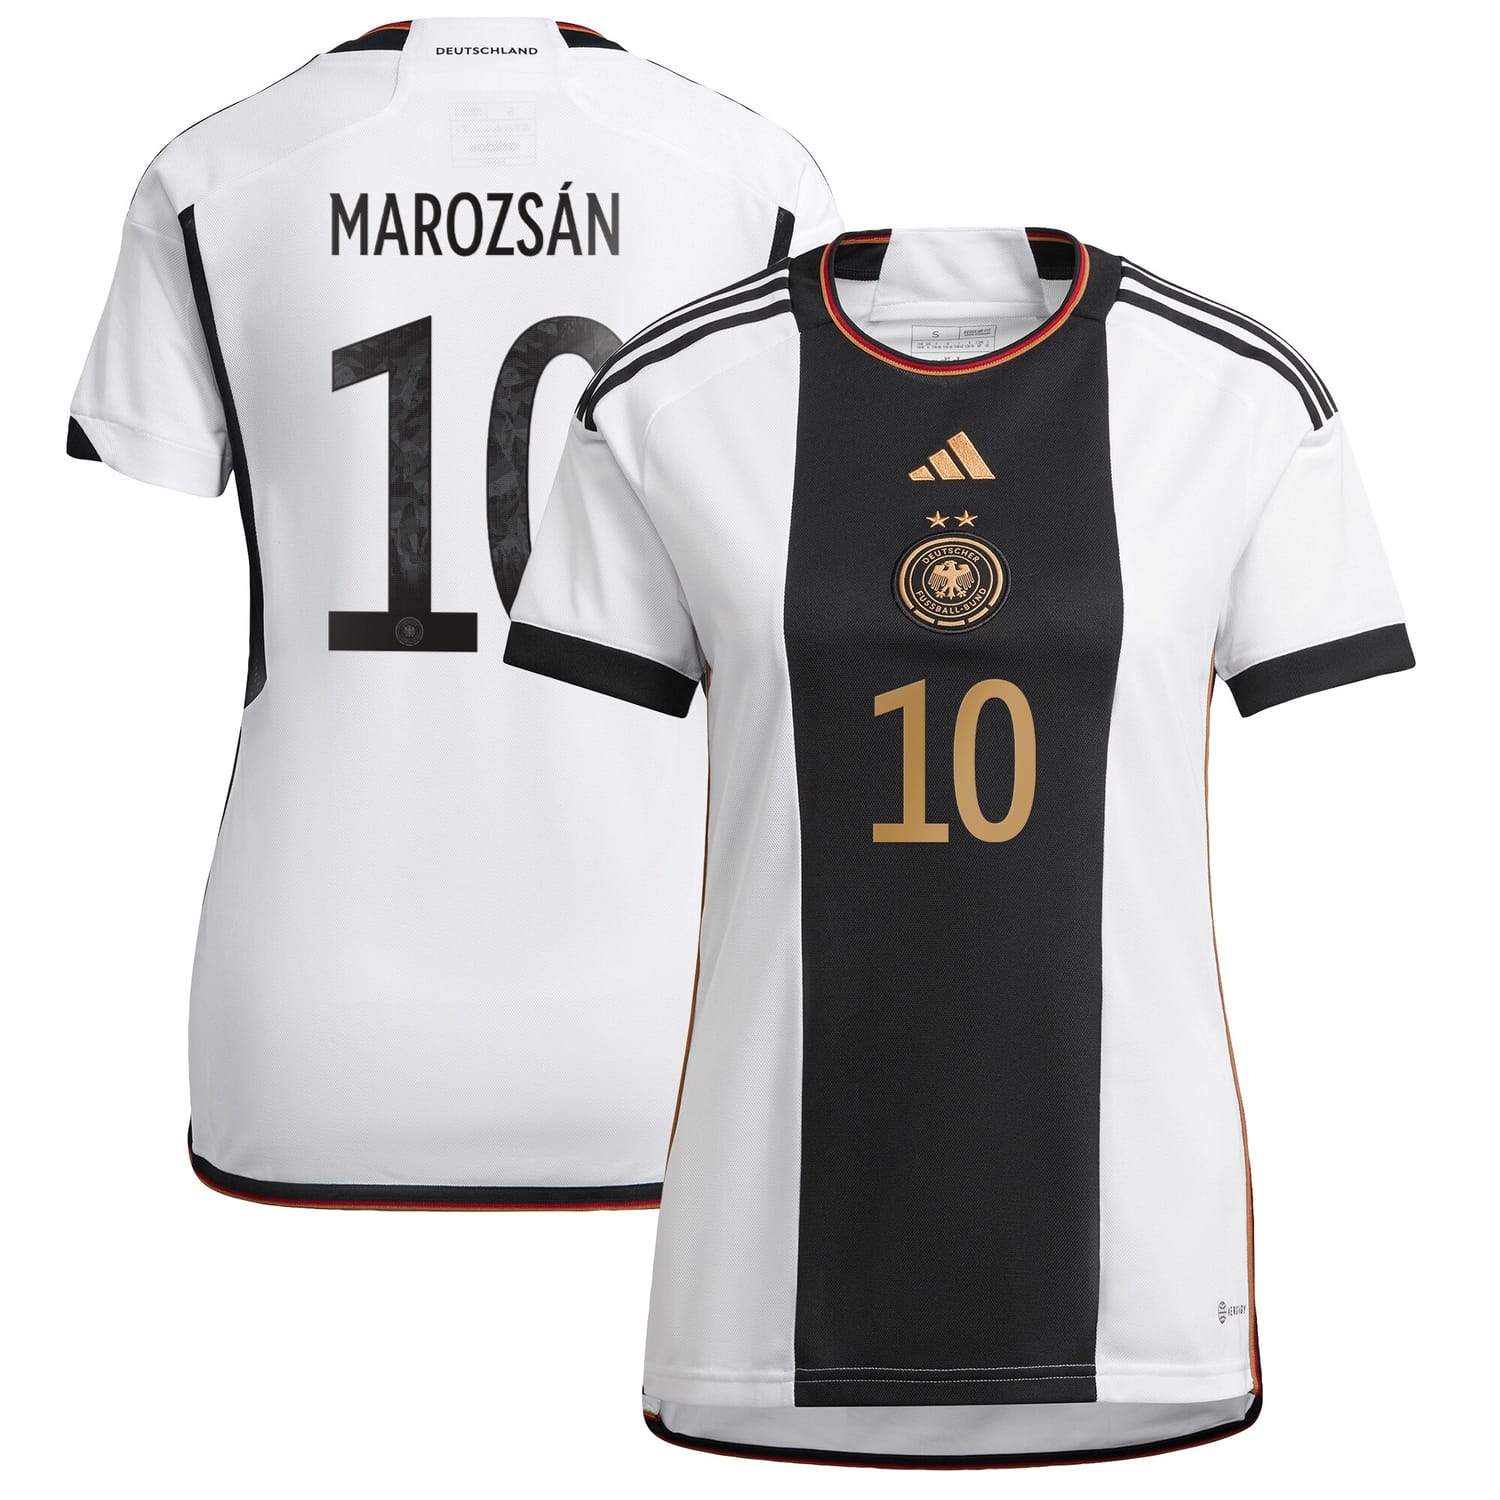 Germany National Team Home Jersey Shirt player Dzsenifer Marozsán 10 printing for Women